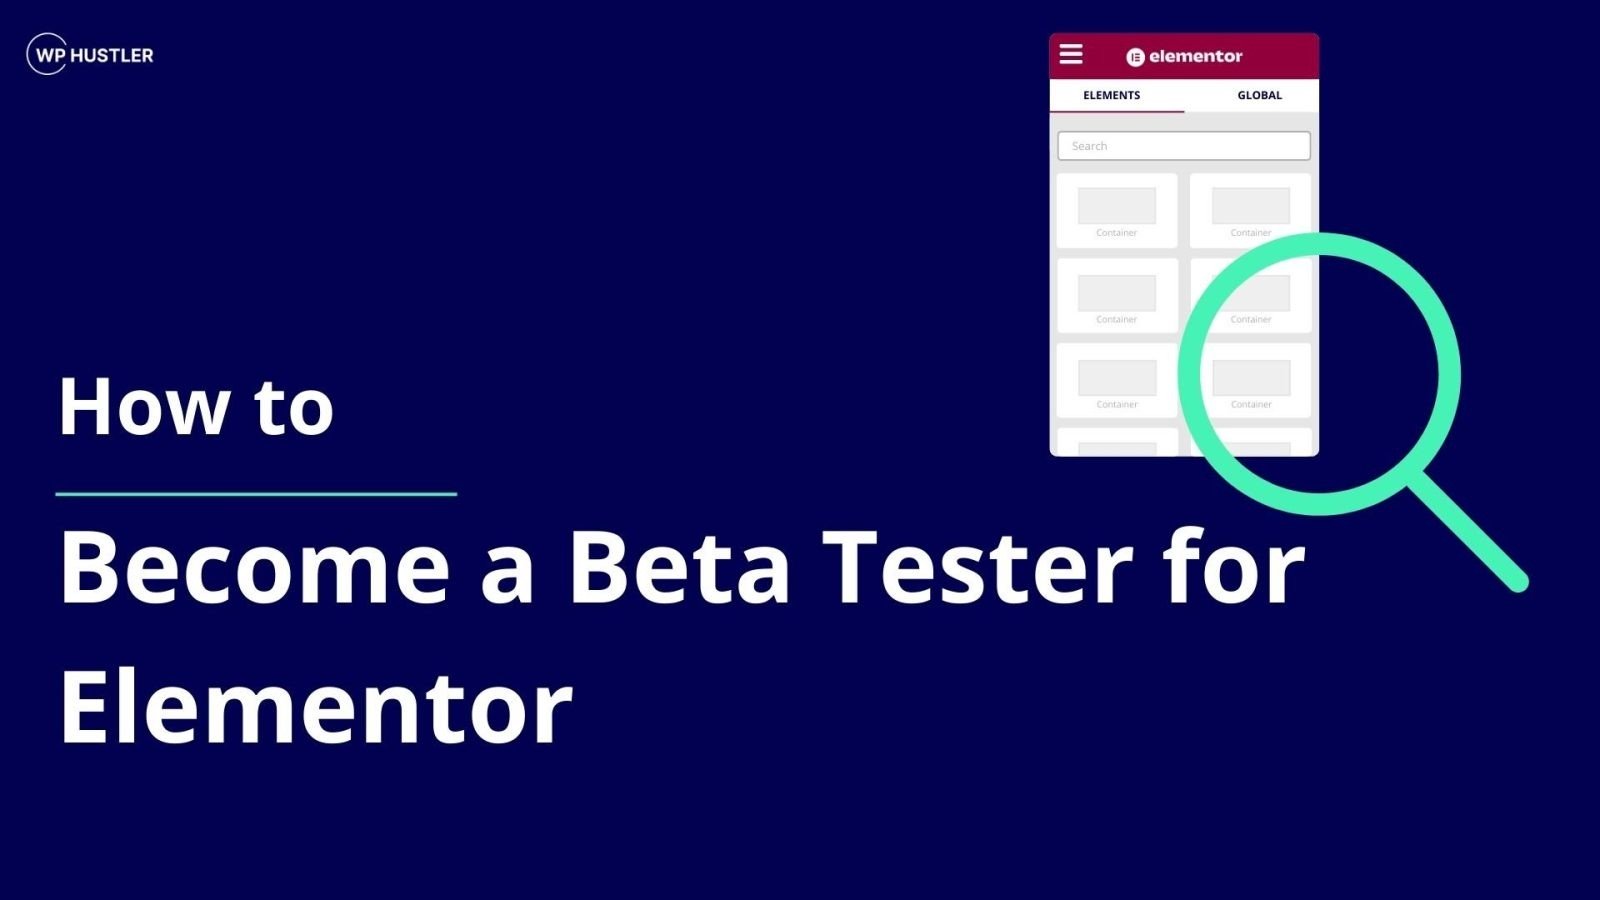 How to Become a Beta Tester for Elementor